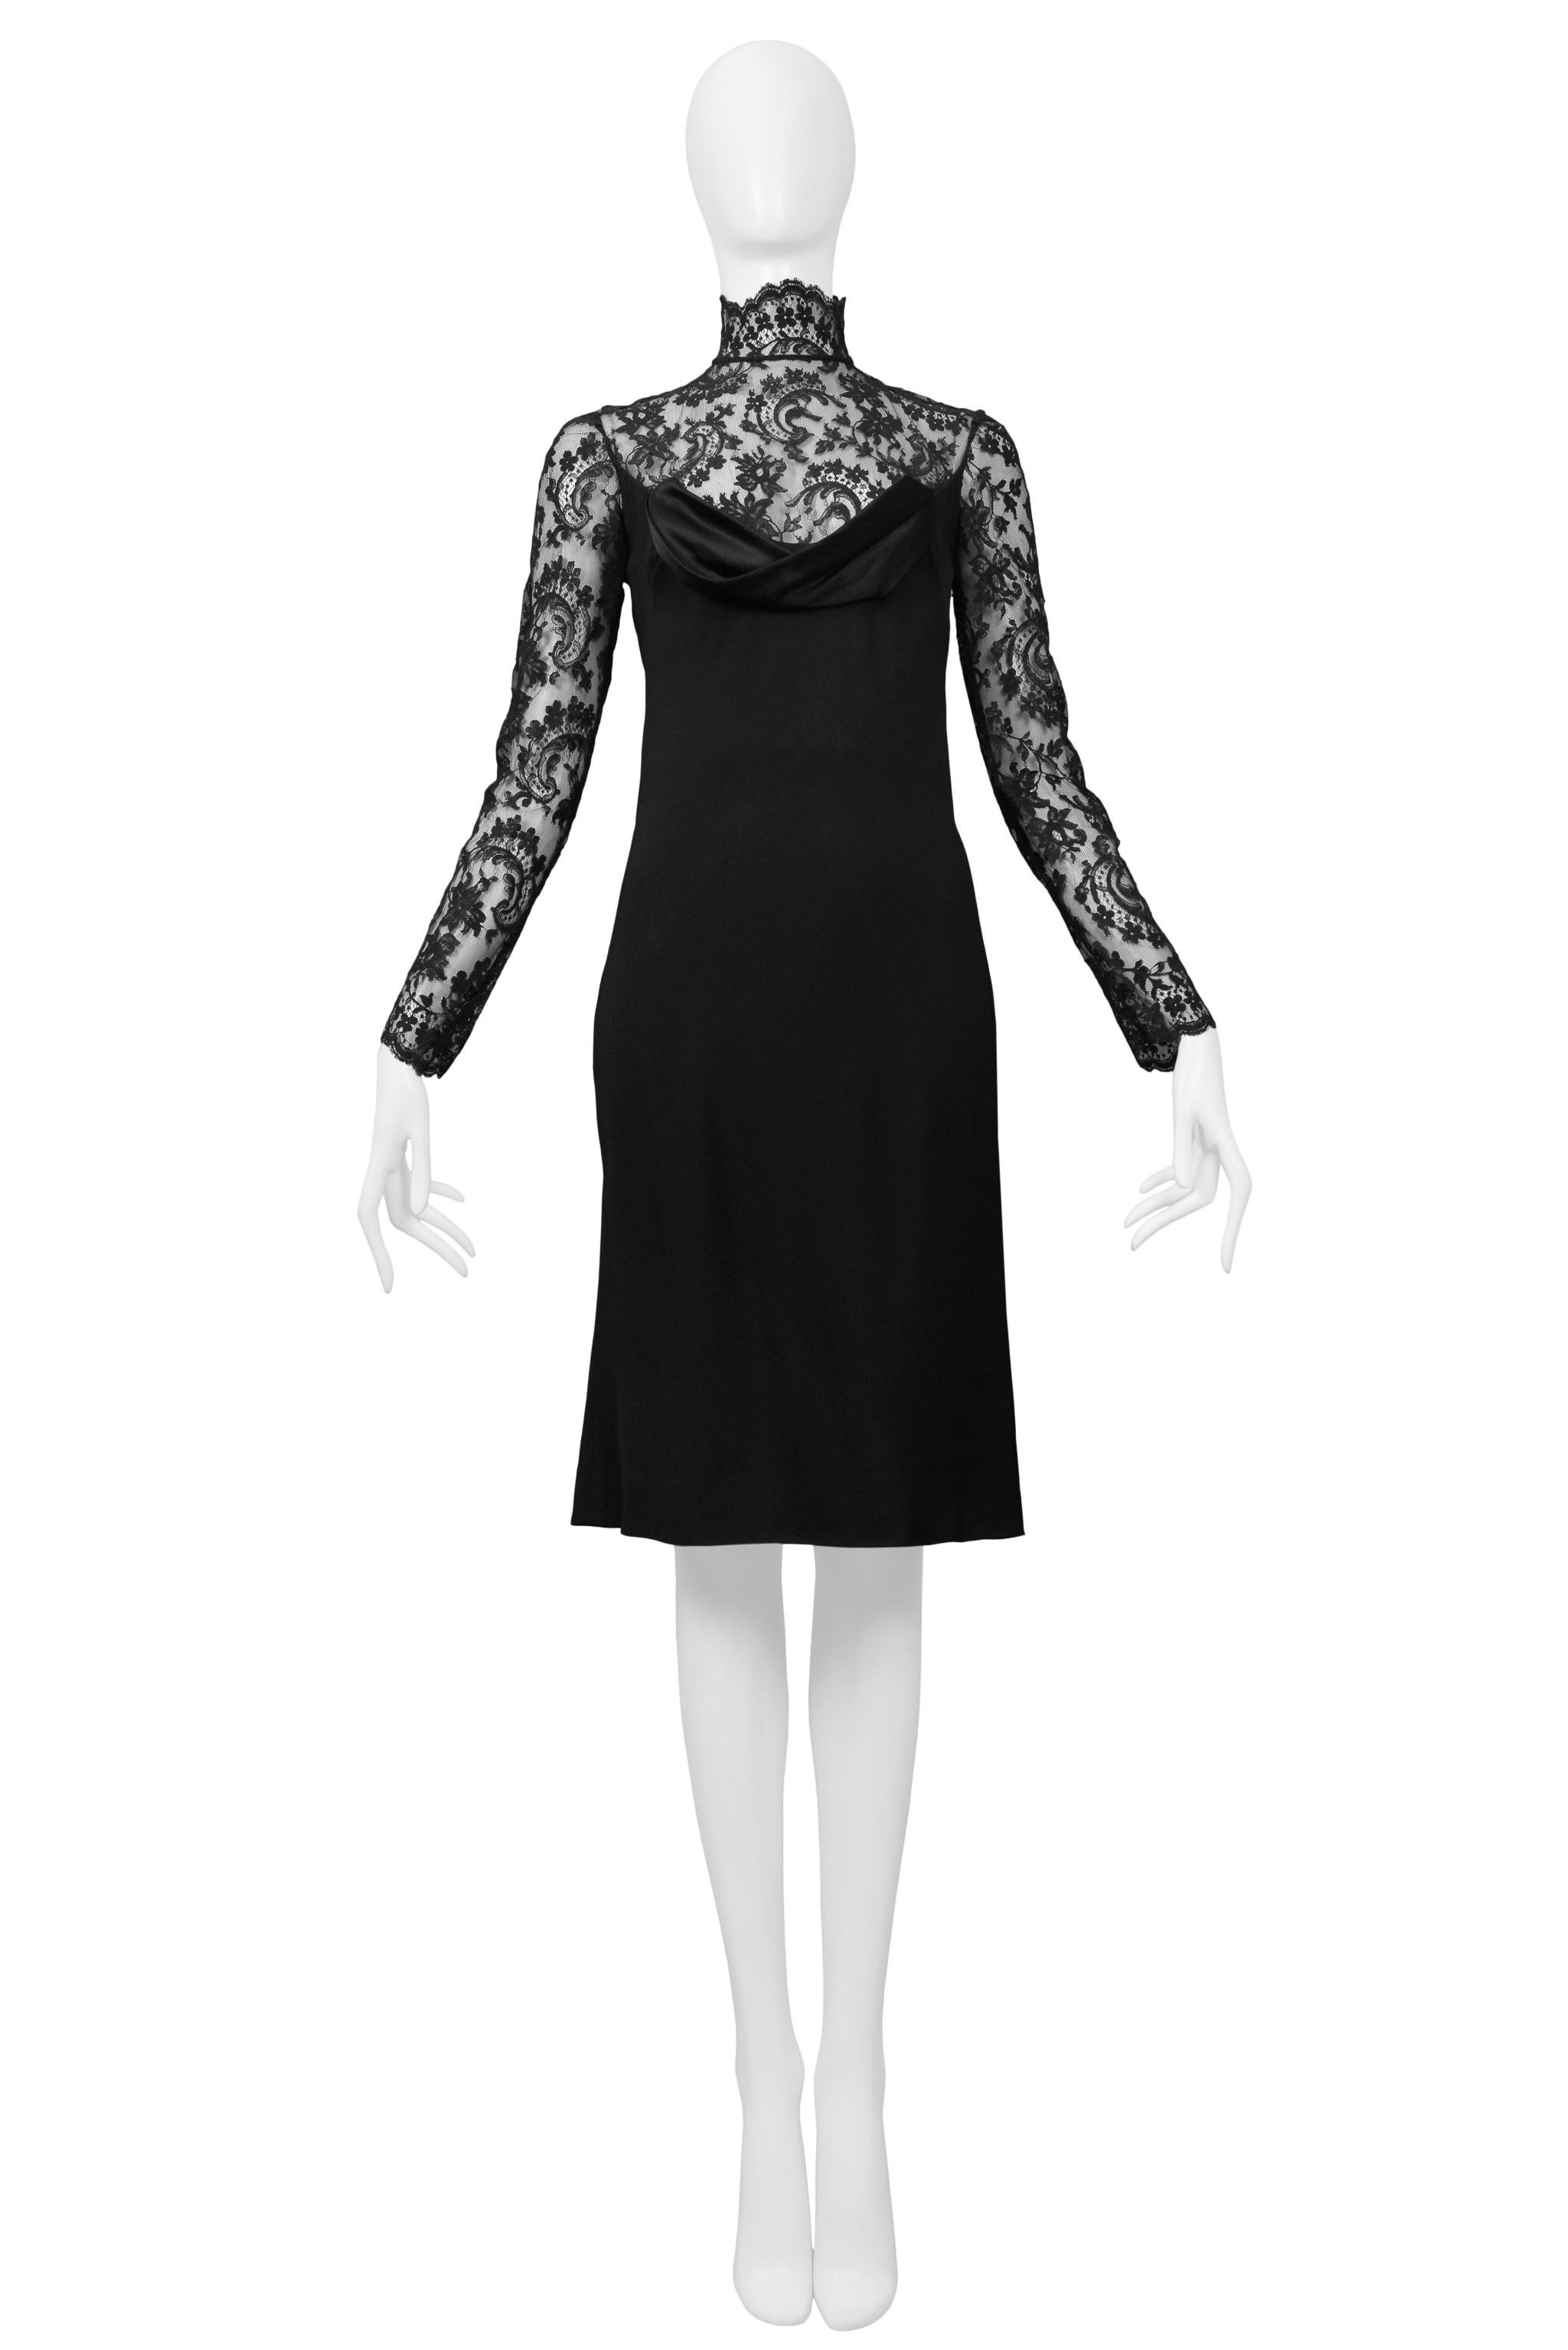 Resurrection is excited to offer a vintage Givenchy by John Galliano black lace cocktail dress featuring long sleeves, a mock neck, silk covered button & zipper closure at back, and a black silk overlay with draped neckline and open back.

Givenchy